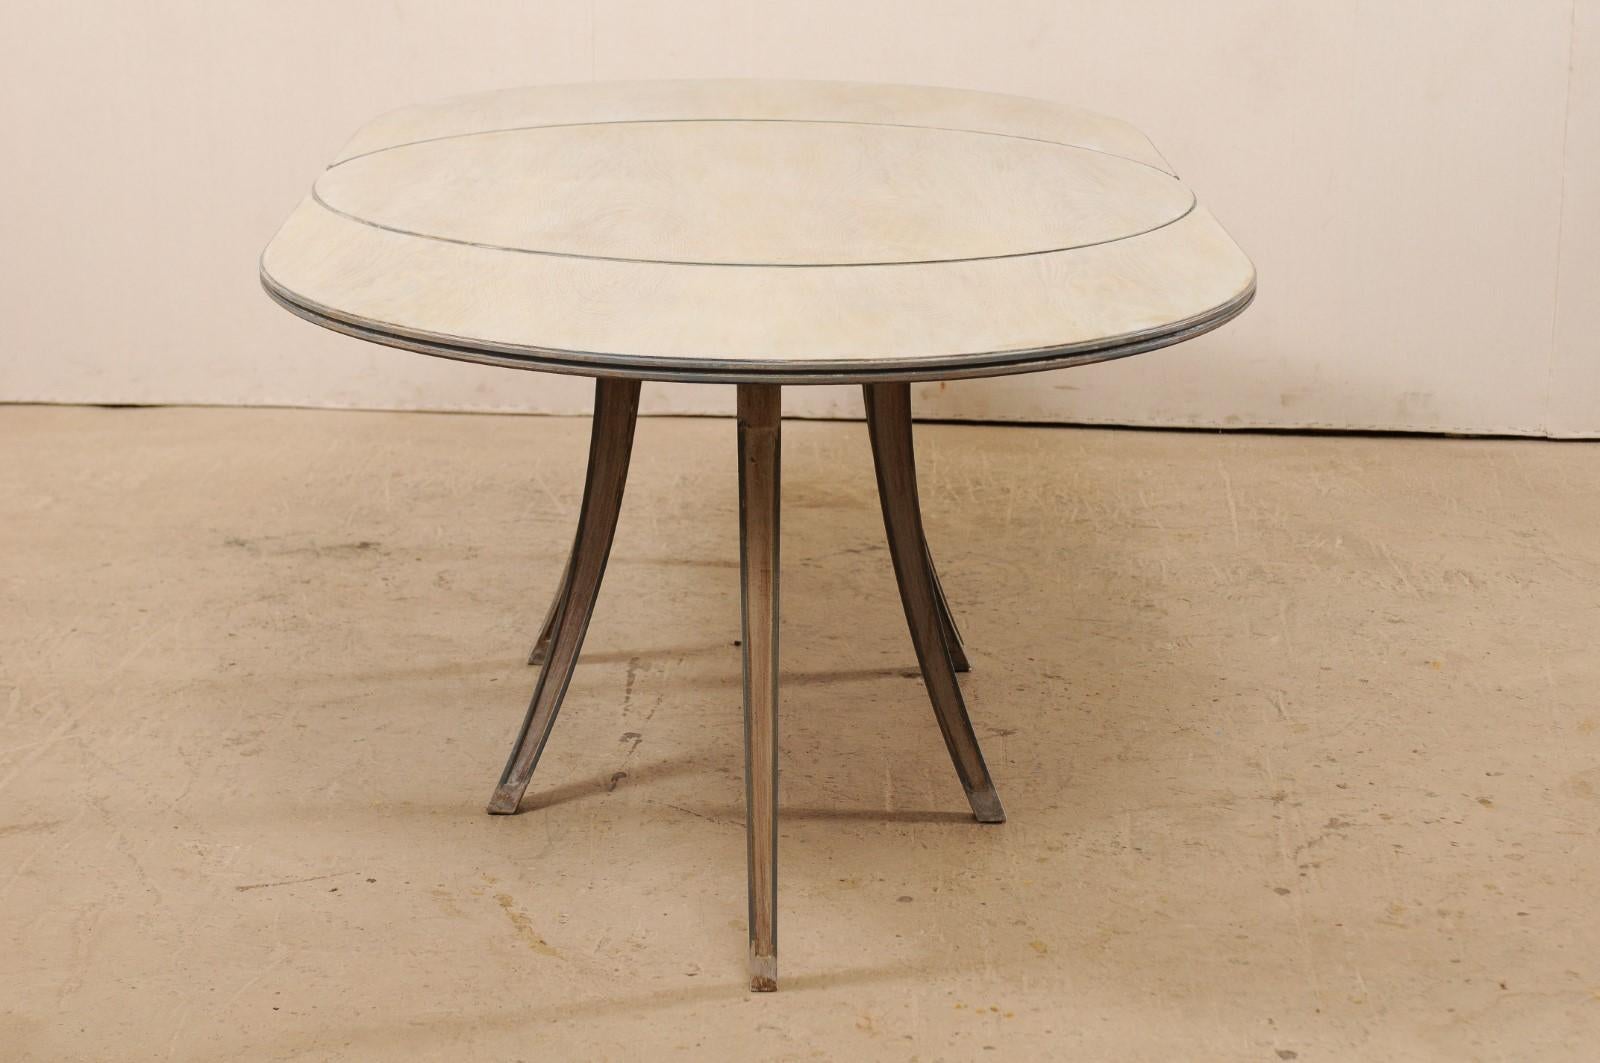 French Mid-century Modern Dining or Center Table, Transitions from Oval to Round 1